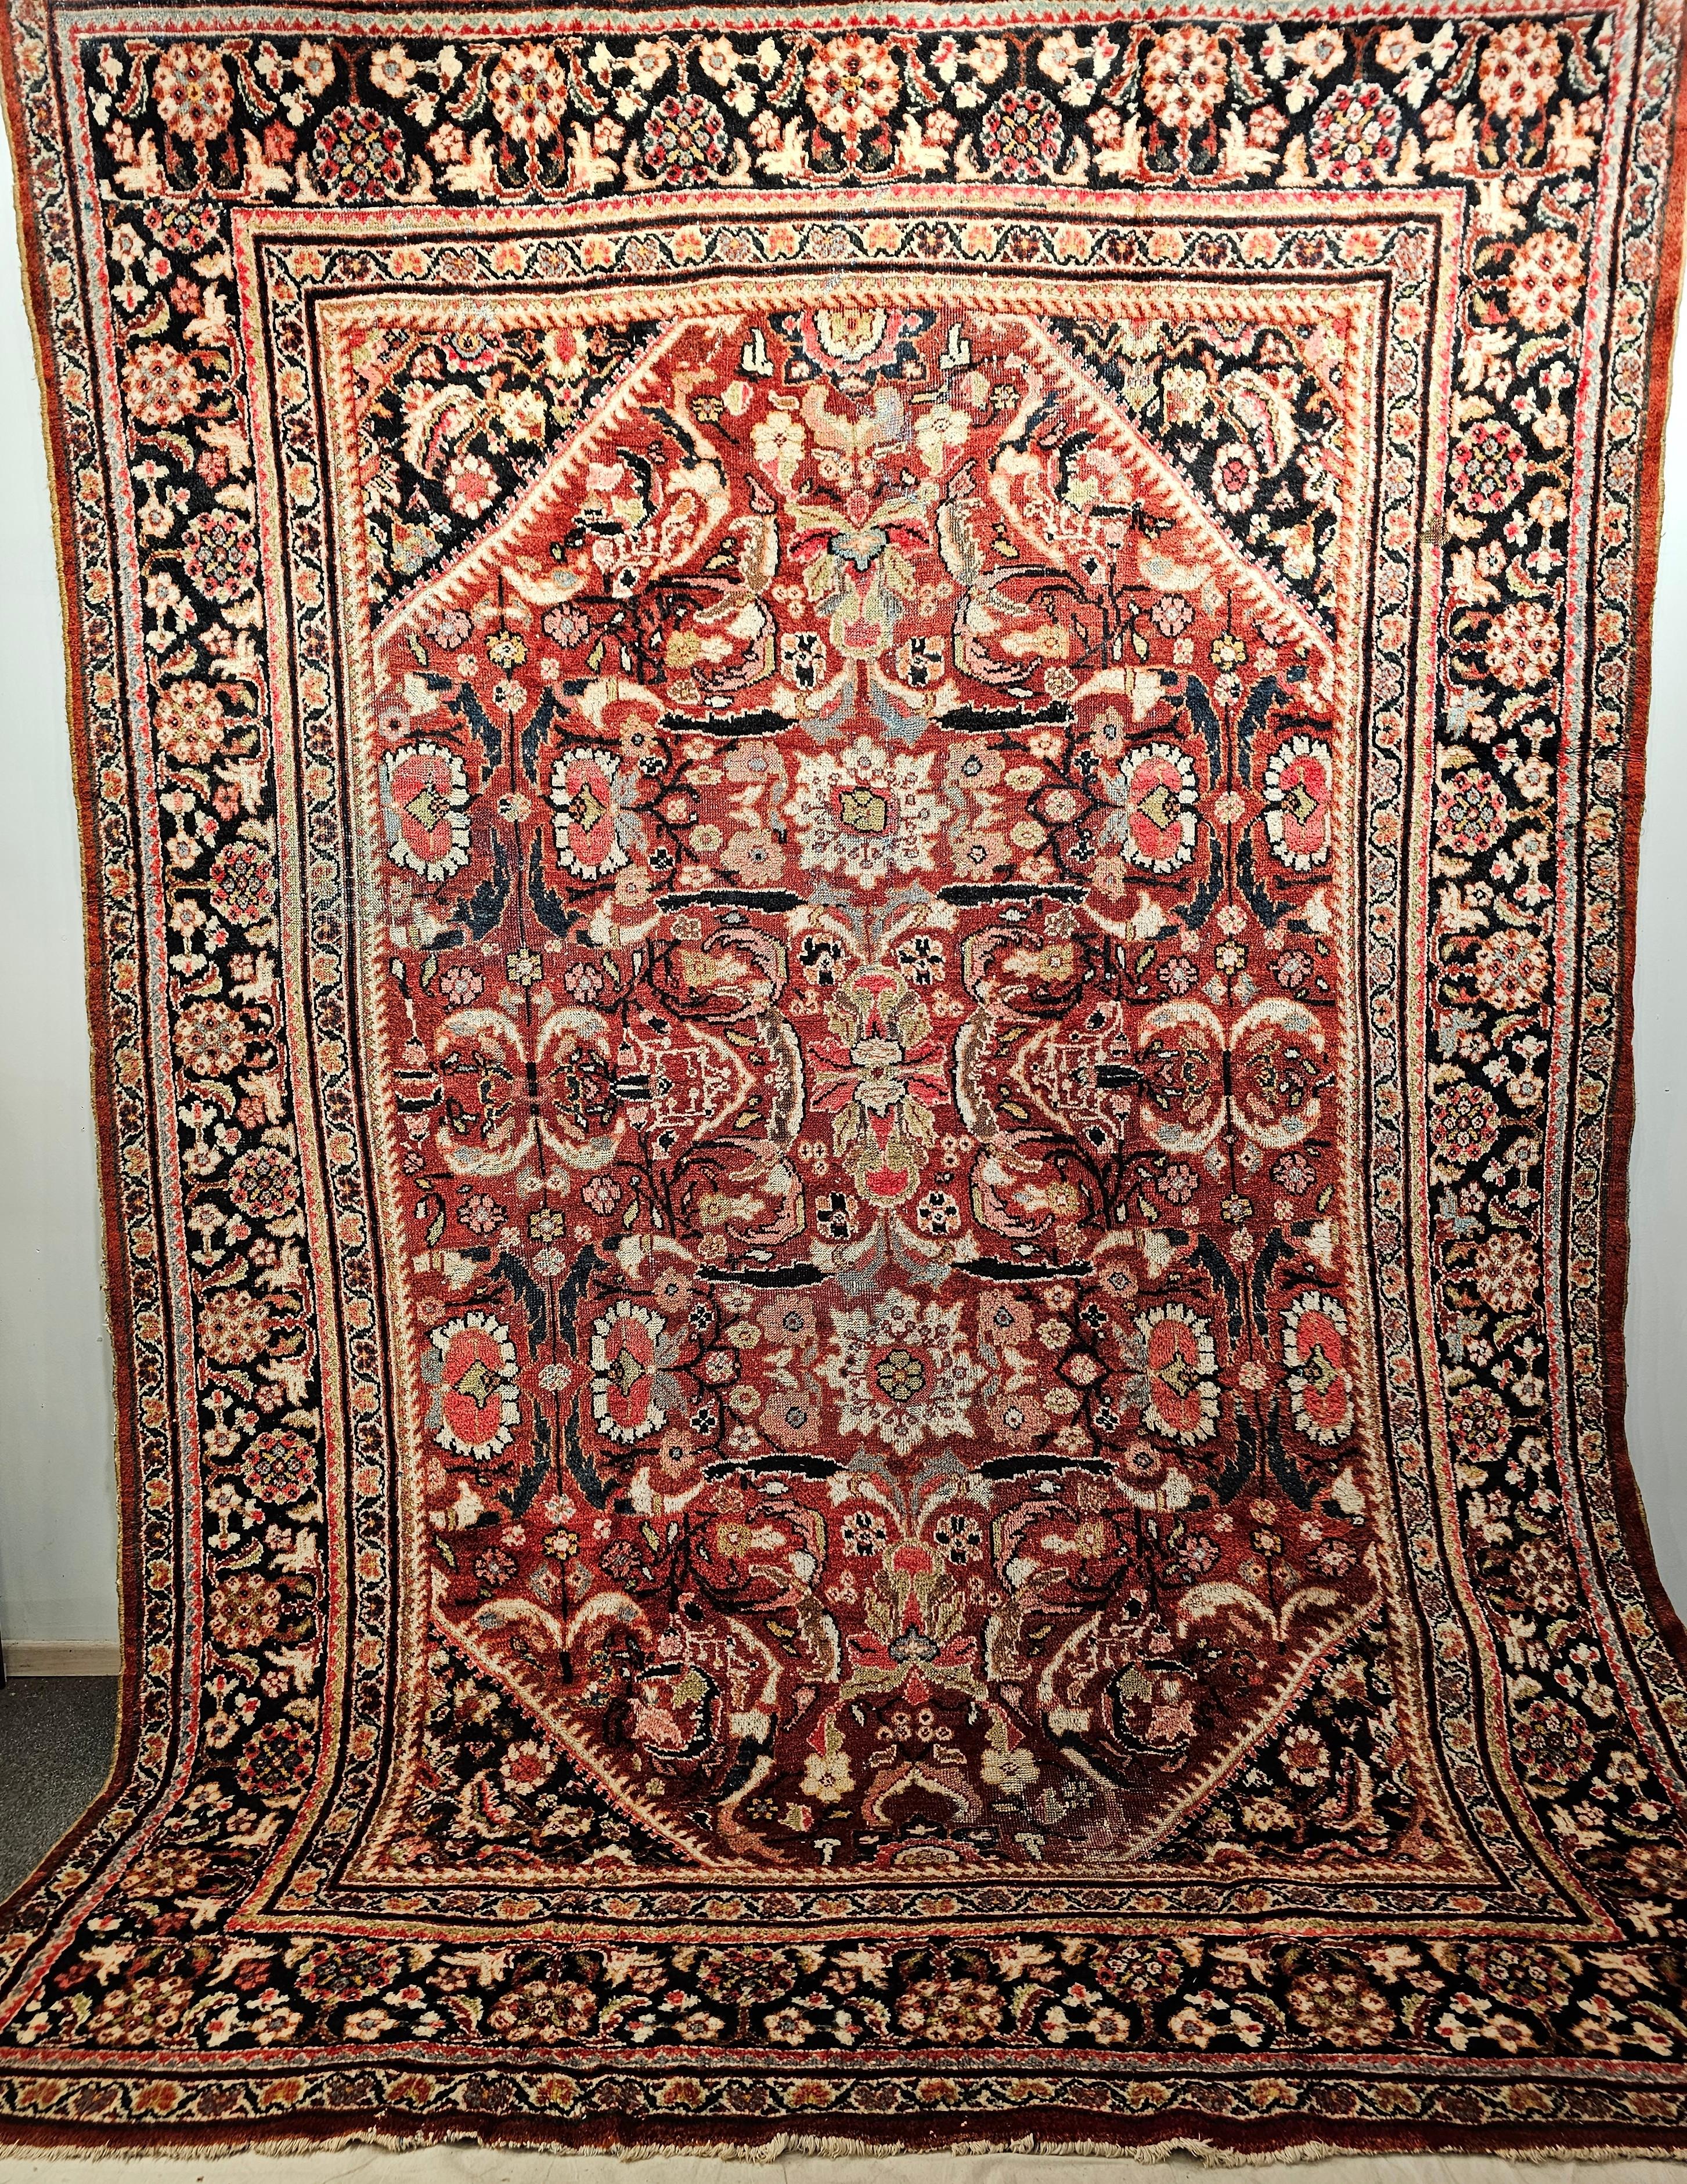 The beautiful and colorful Mahal Sultanabad room-size rug from the early 1900a has an all-over large format pattern in auburn red, navy blue, pink, chartreuse green, and cream colors.  The main field's dark auburn color is a very pleasing and ideal